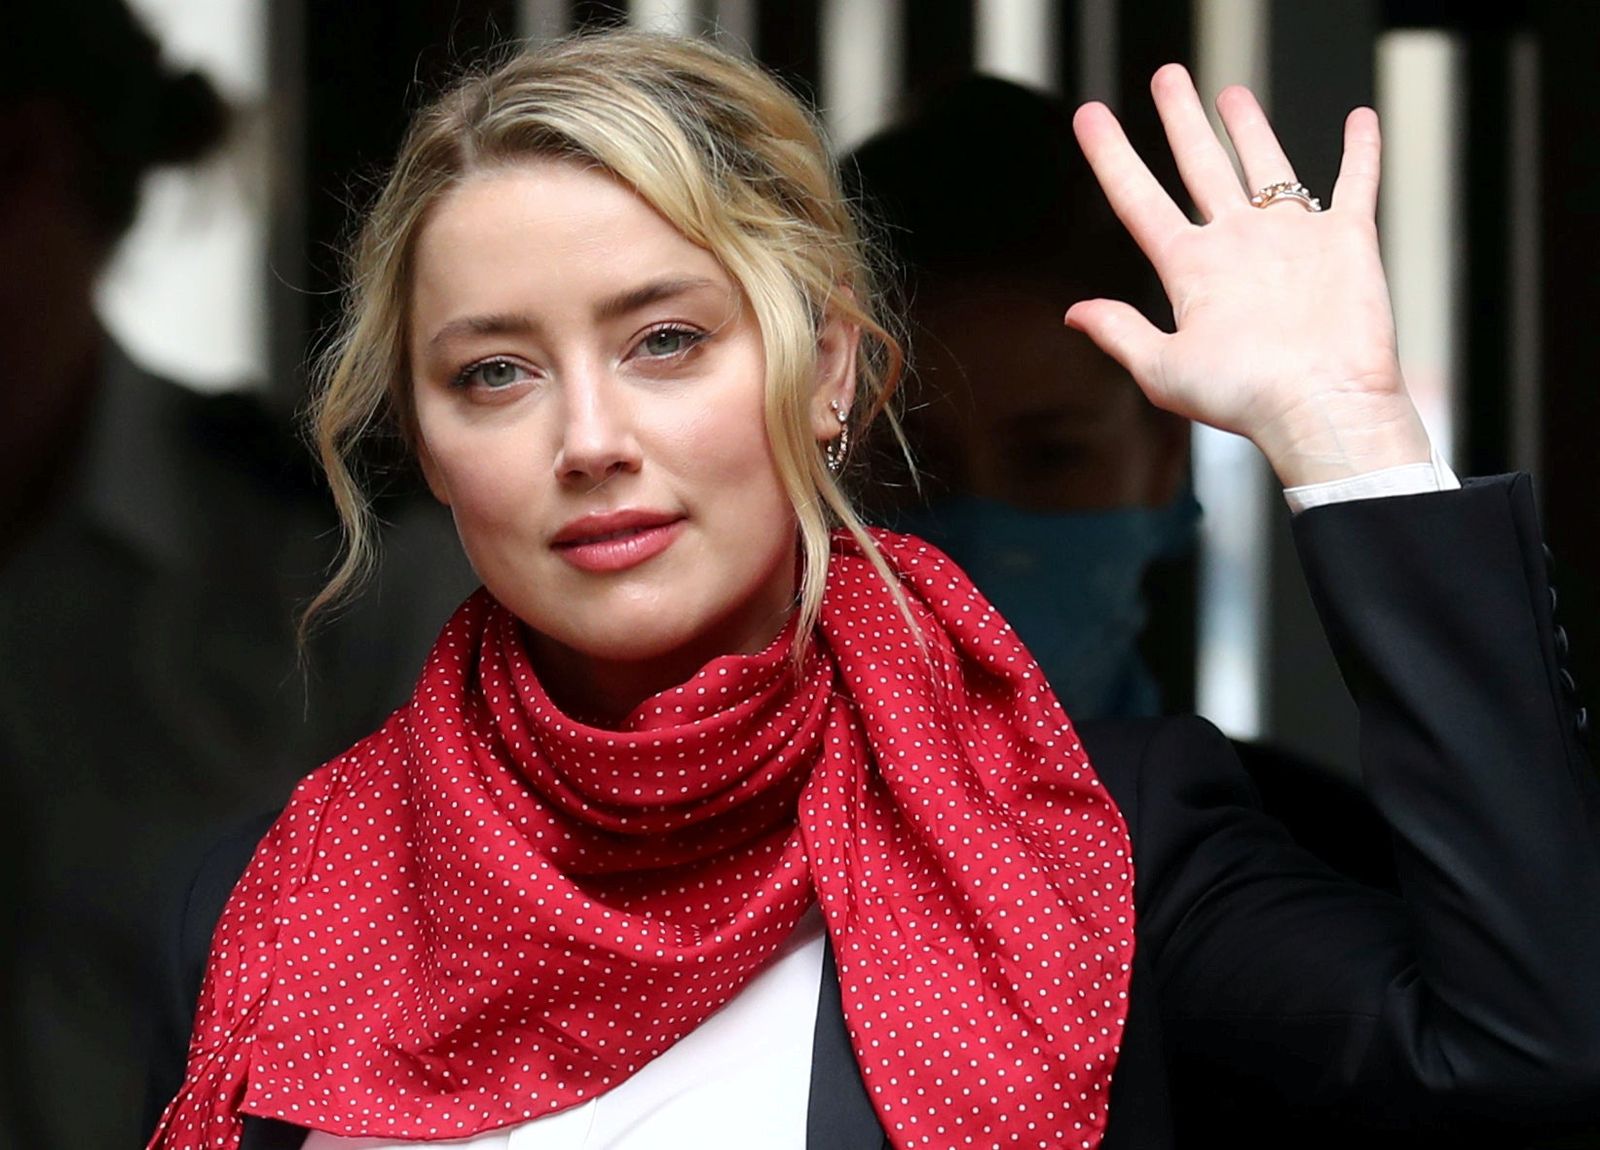 FILE PHOTO: Actors Johnny Depp and Amber Heard at the High Court in London - REUTERS